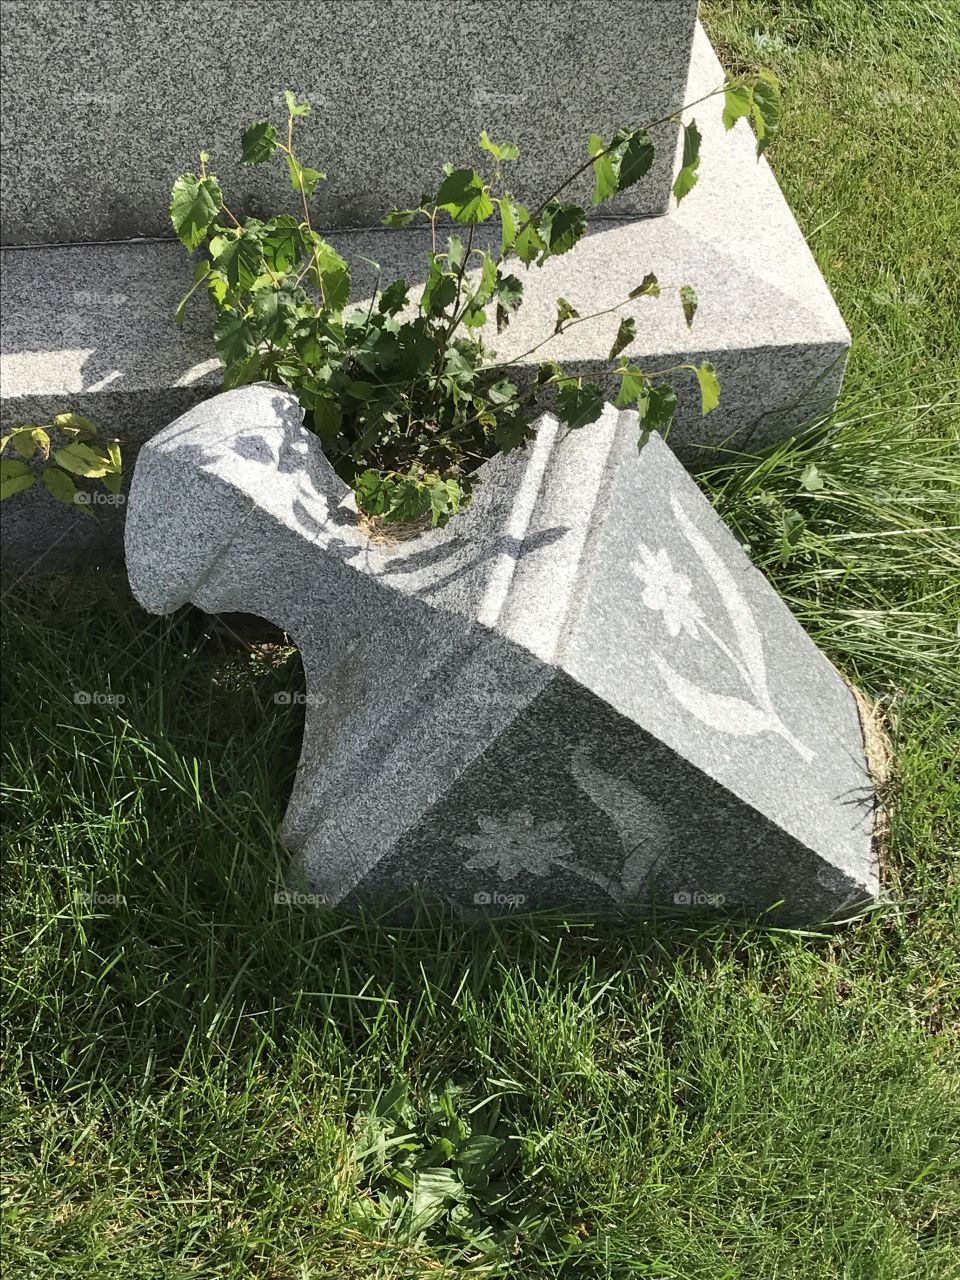 The decorative top of a monument has broken off and is laying in the grass.